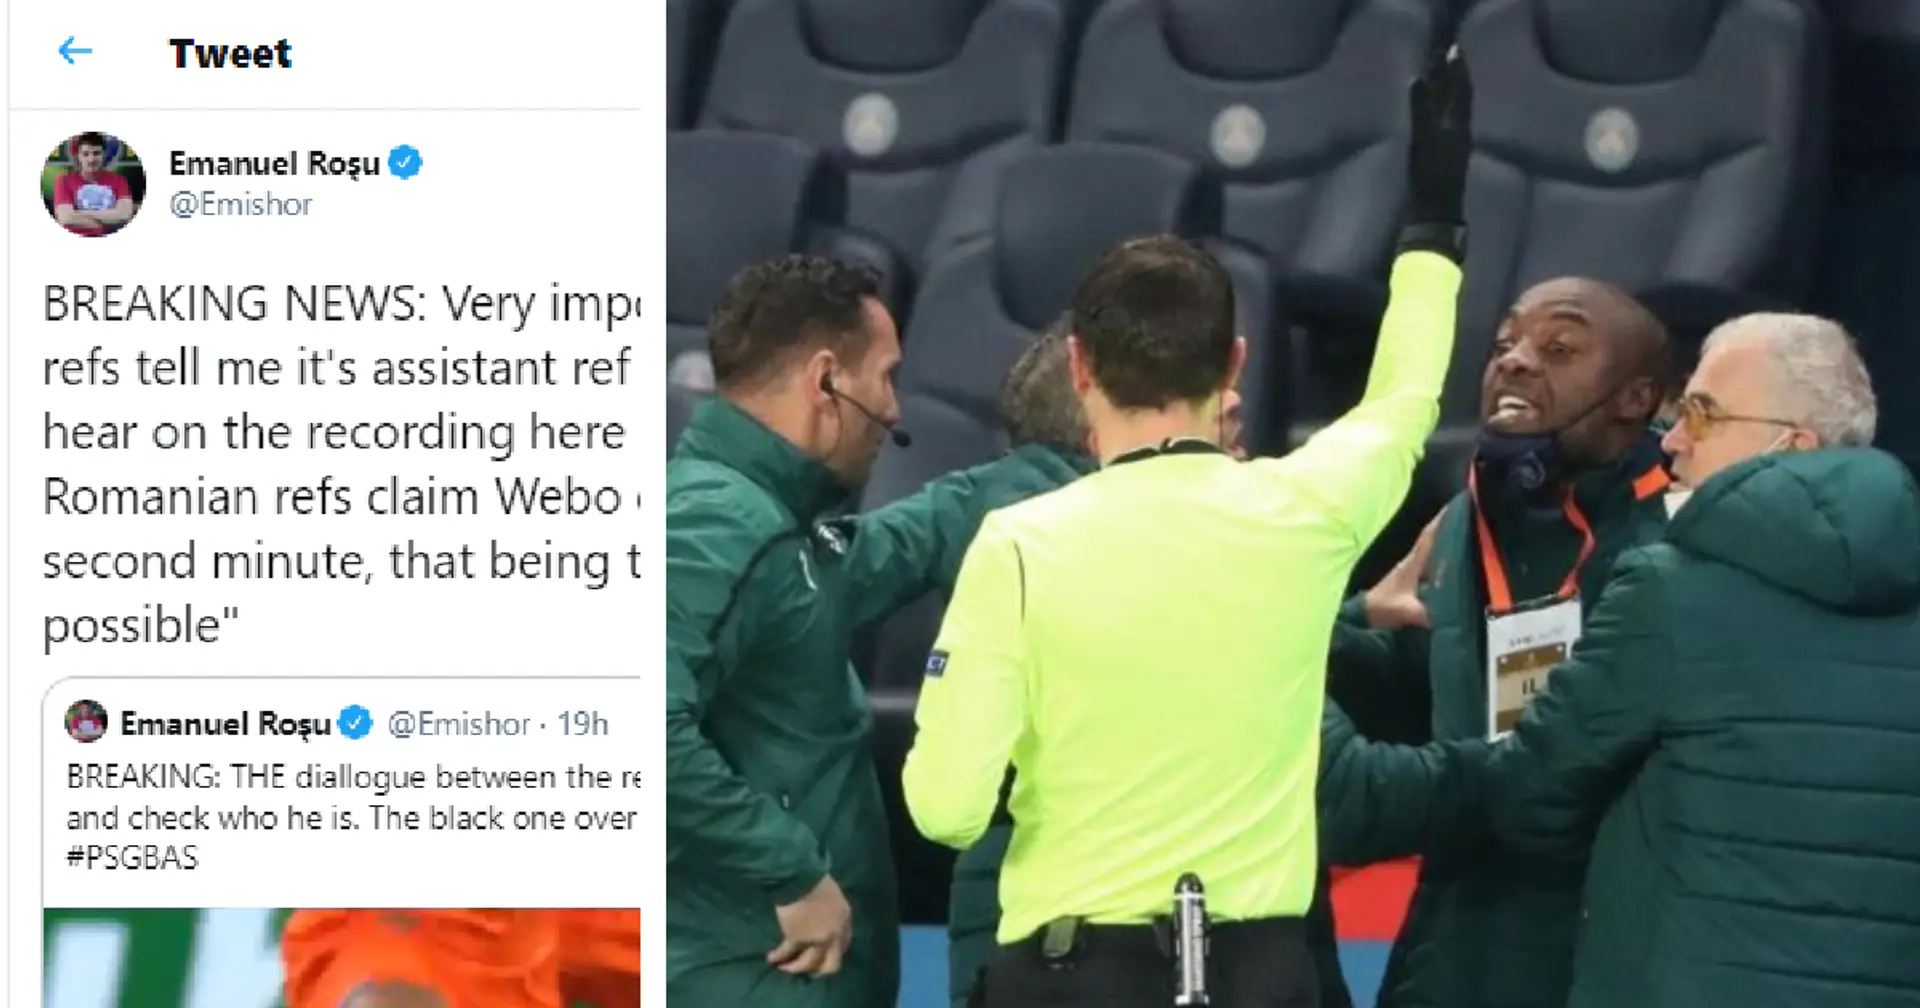 "Webo called ref 'gypsy'": Romanian journalist explains what happened in racism scandal in PSG v Istanbul game